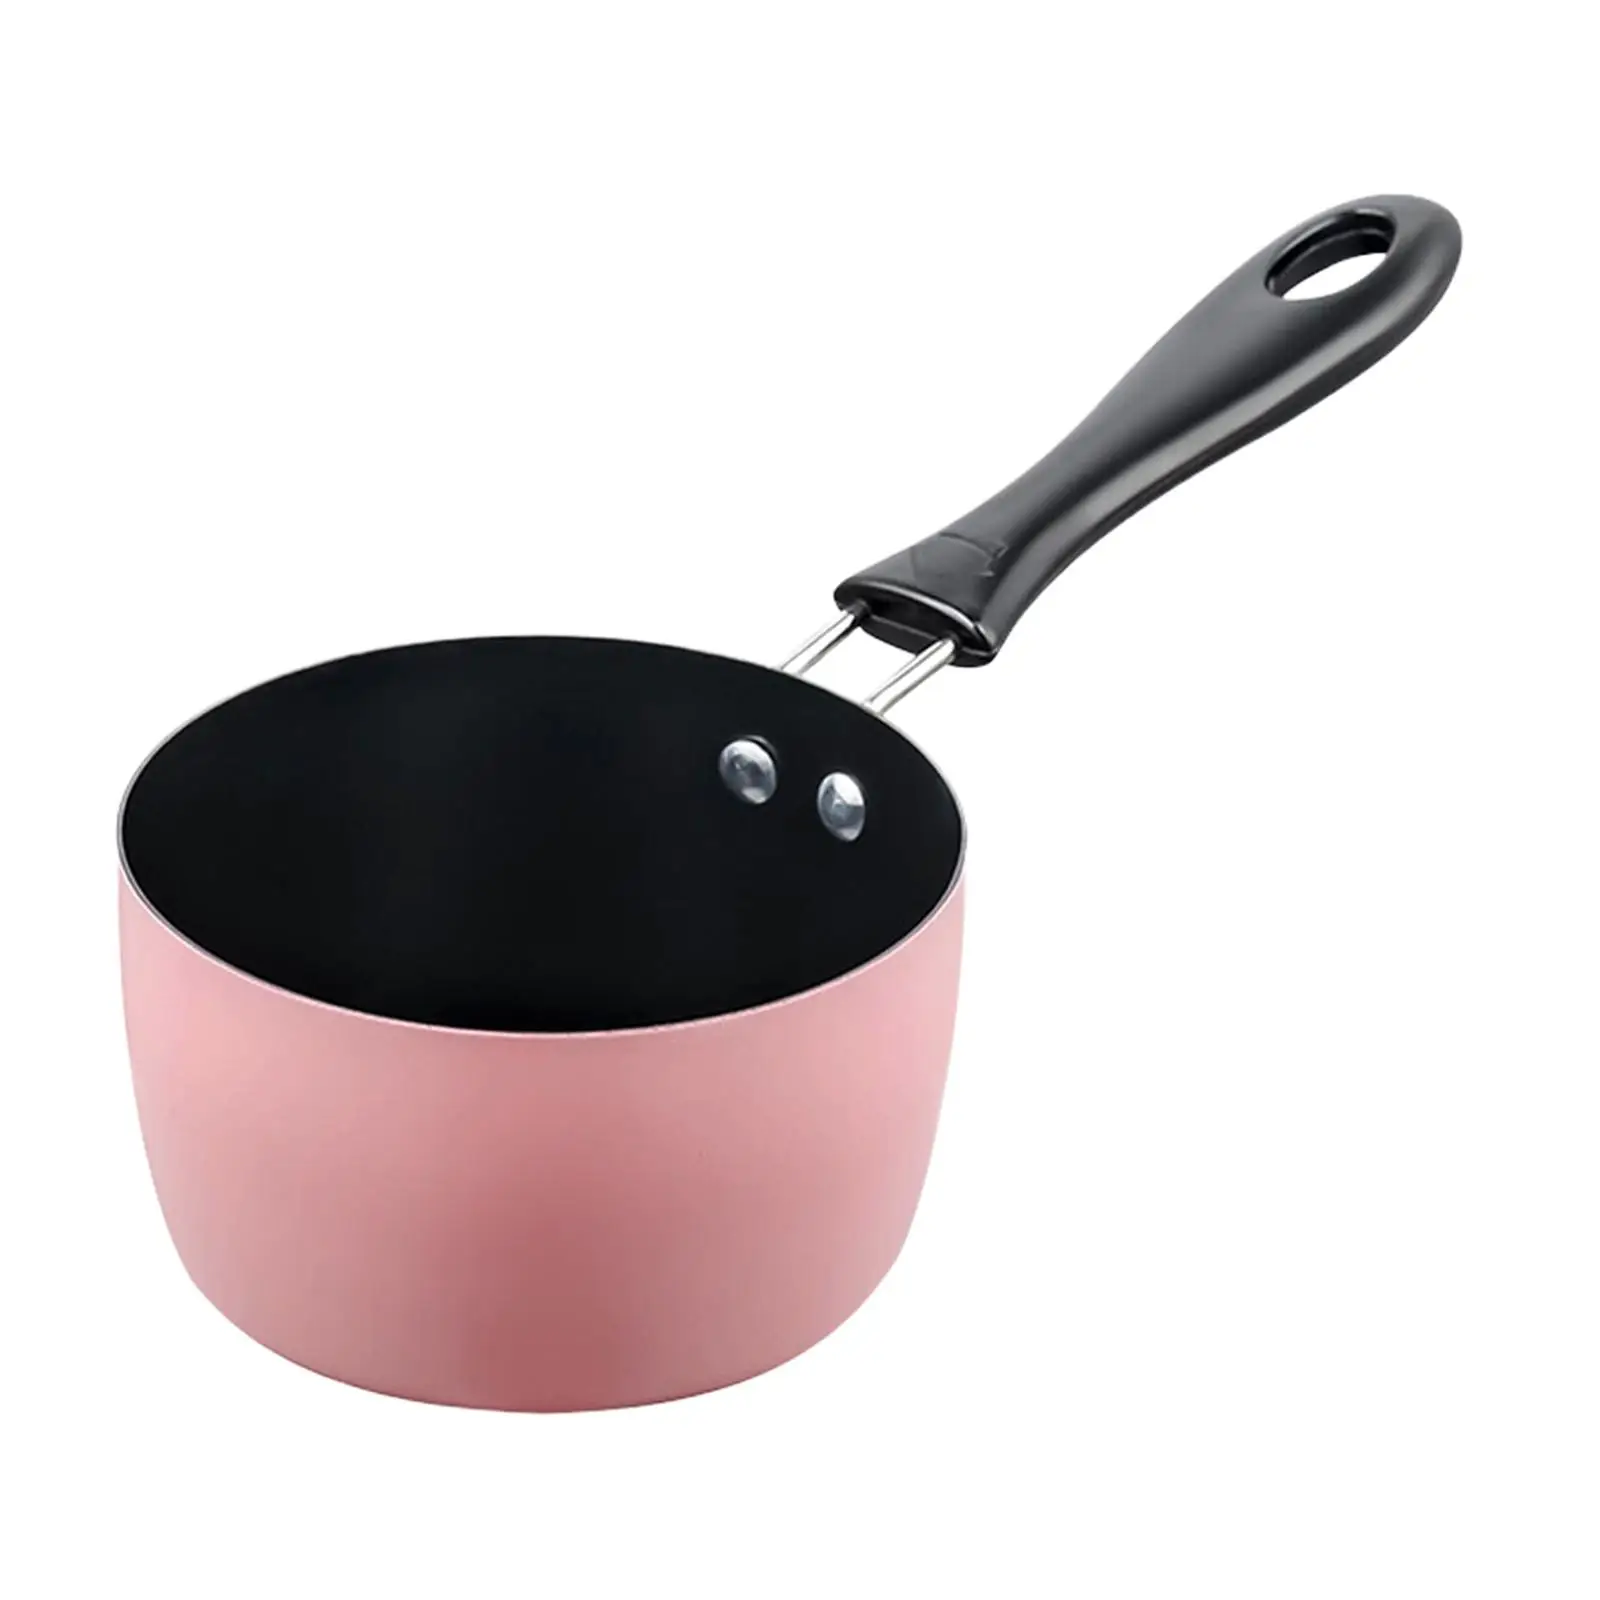 Milk Pan Multifunctional Thickened Non Stick Sauce Pan Small Saucepan for Stove Top Gas Stove Induction Cooker